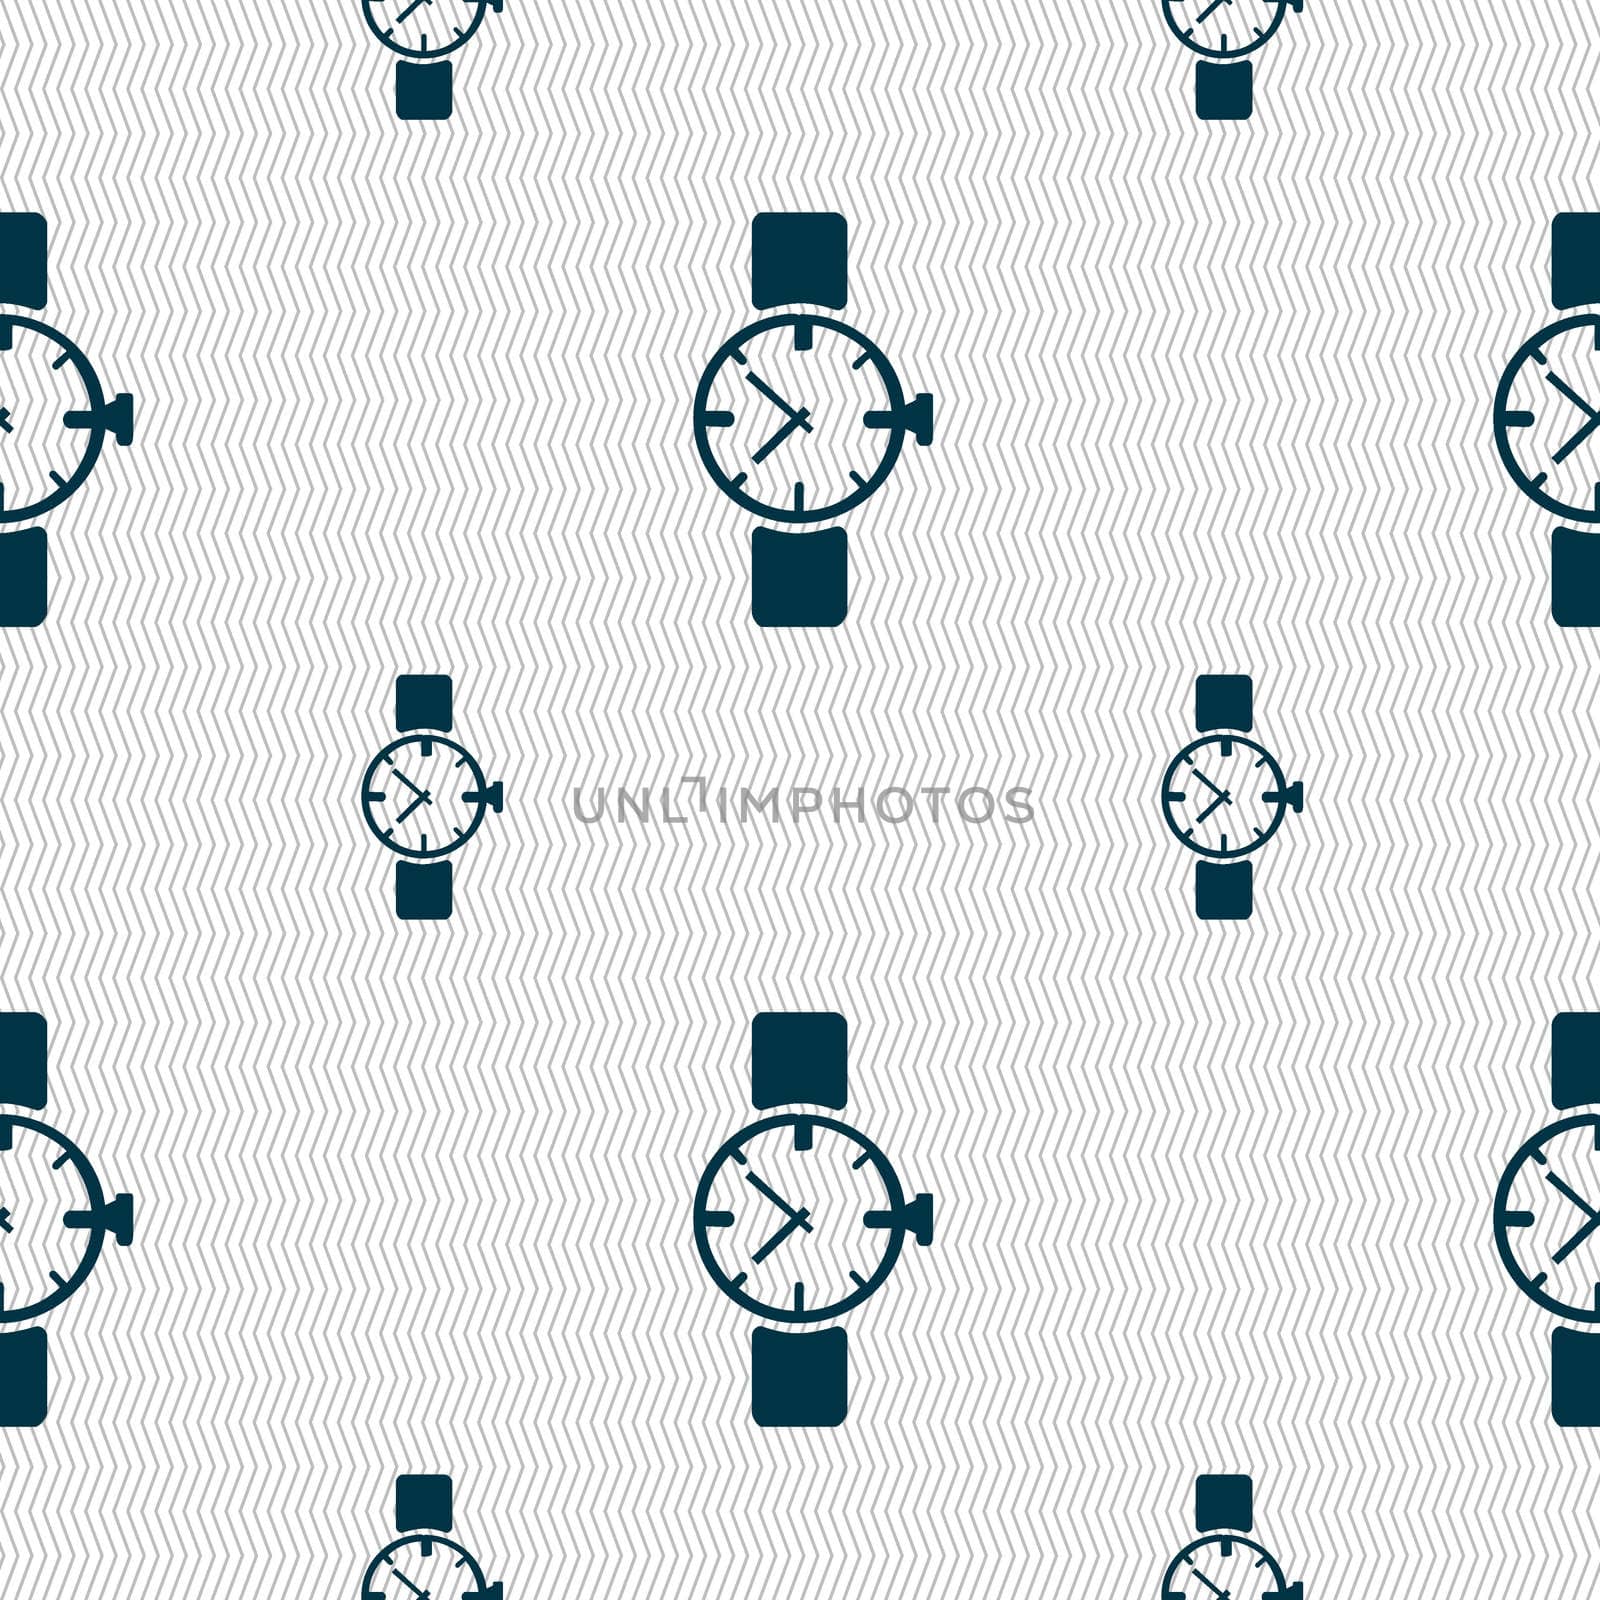 watches icon symbol . Seamless pattern with geometric texture. illustration